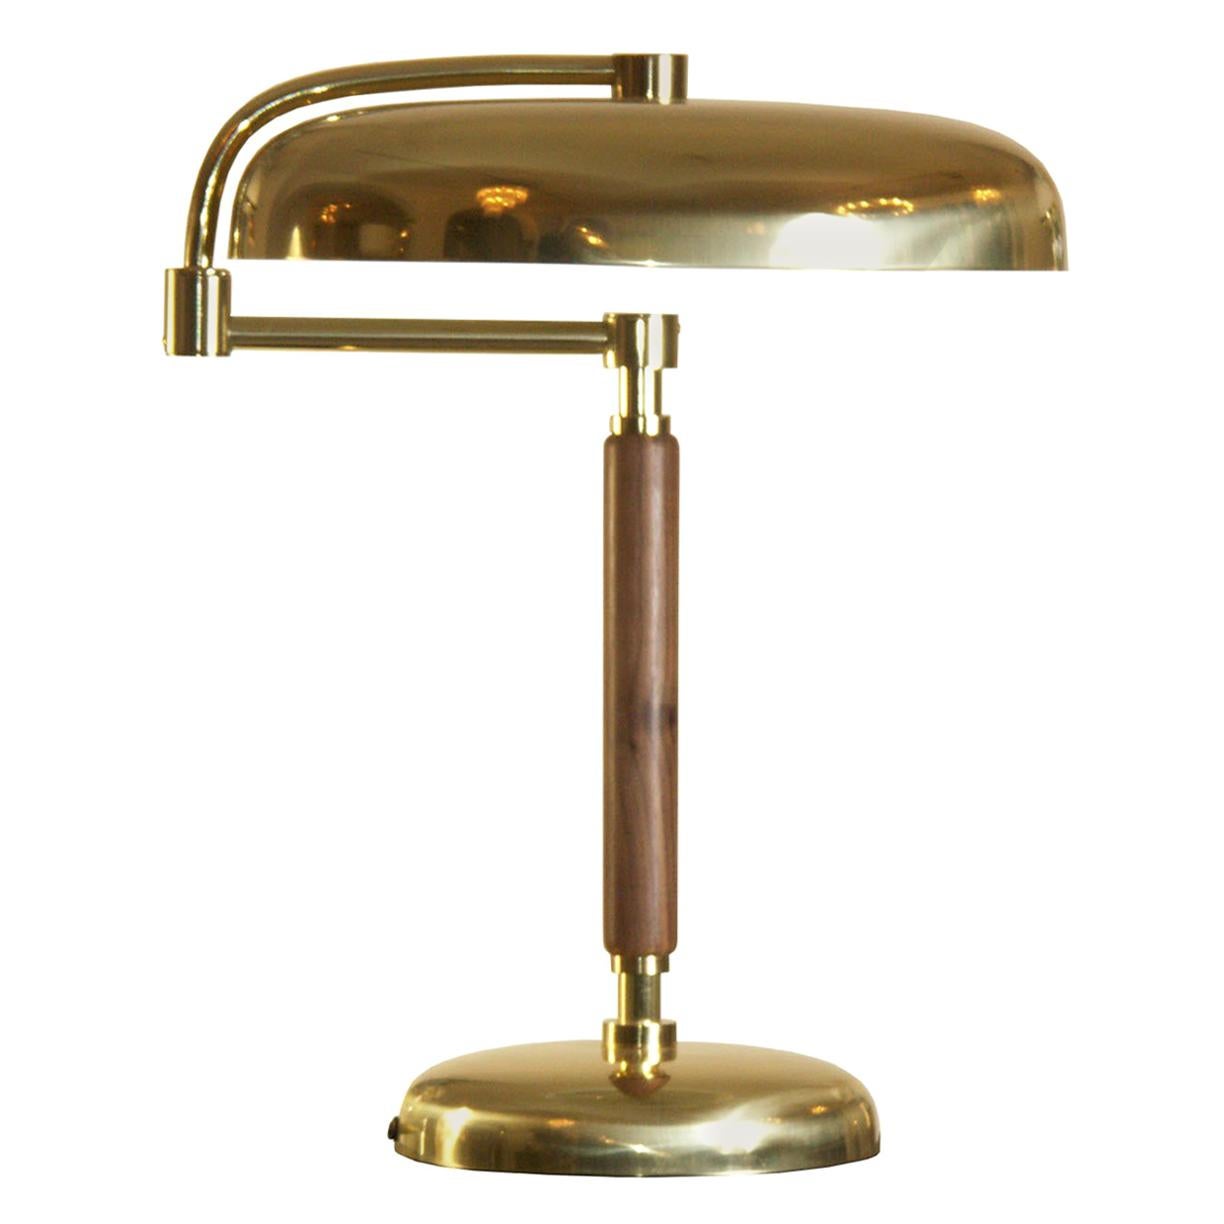 Very elegant timeless desk lamp. Very heavy base, sviveling shade
Brass nickel-plated - stem in black laquered beechwood, other finishes as well.

Most components according to the UL regulations, with an additional charge we will UL-list and label